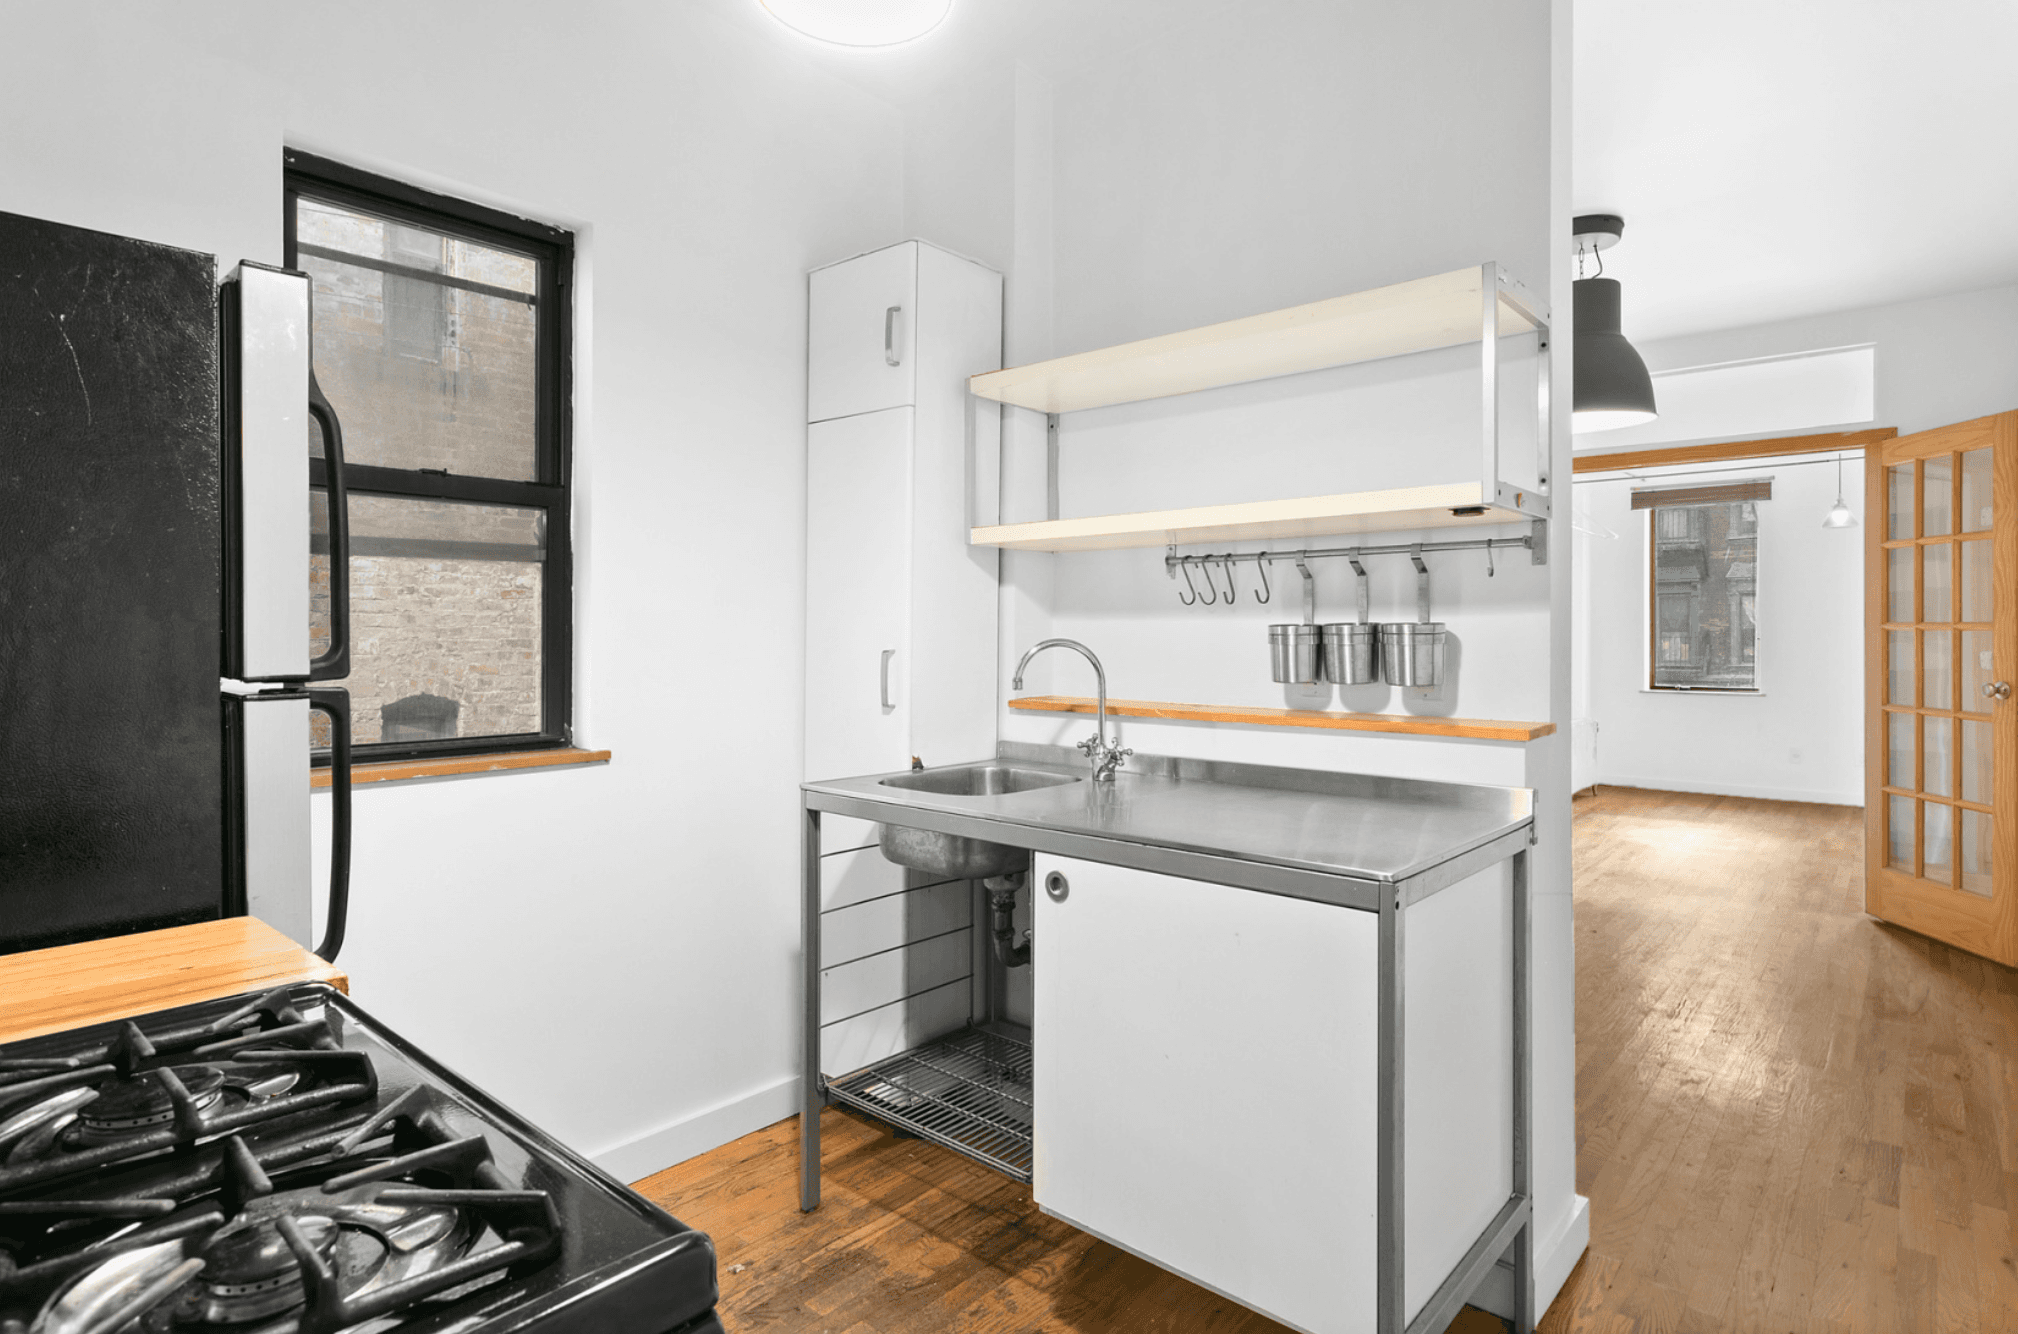 Bright 2 bedroom apartment in East Williamsburg near the G and L train.